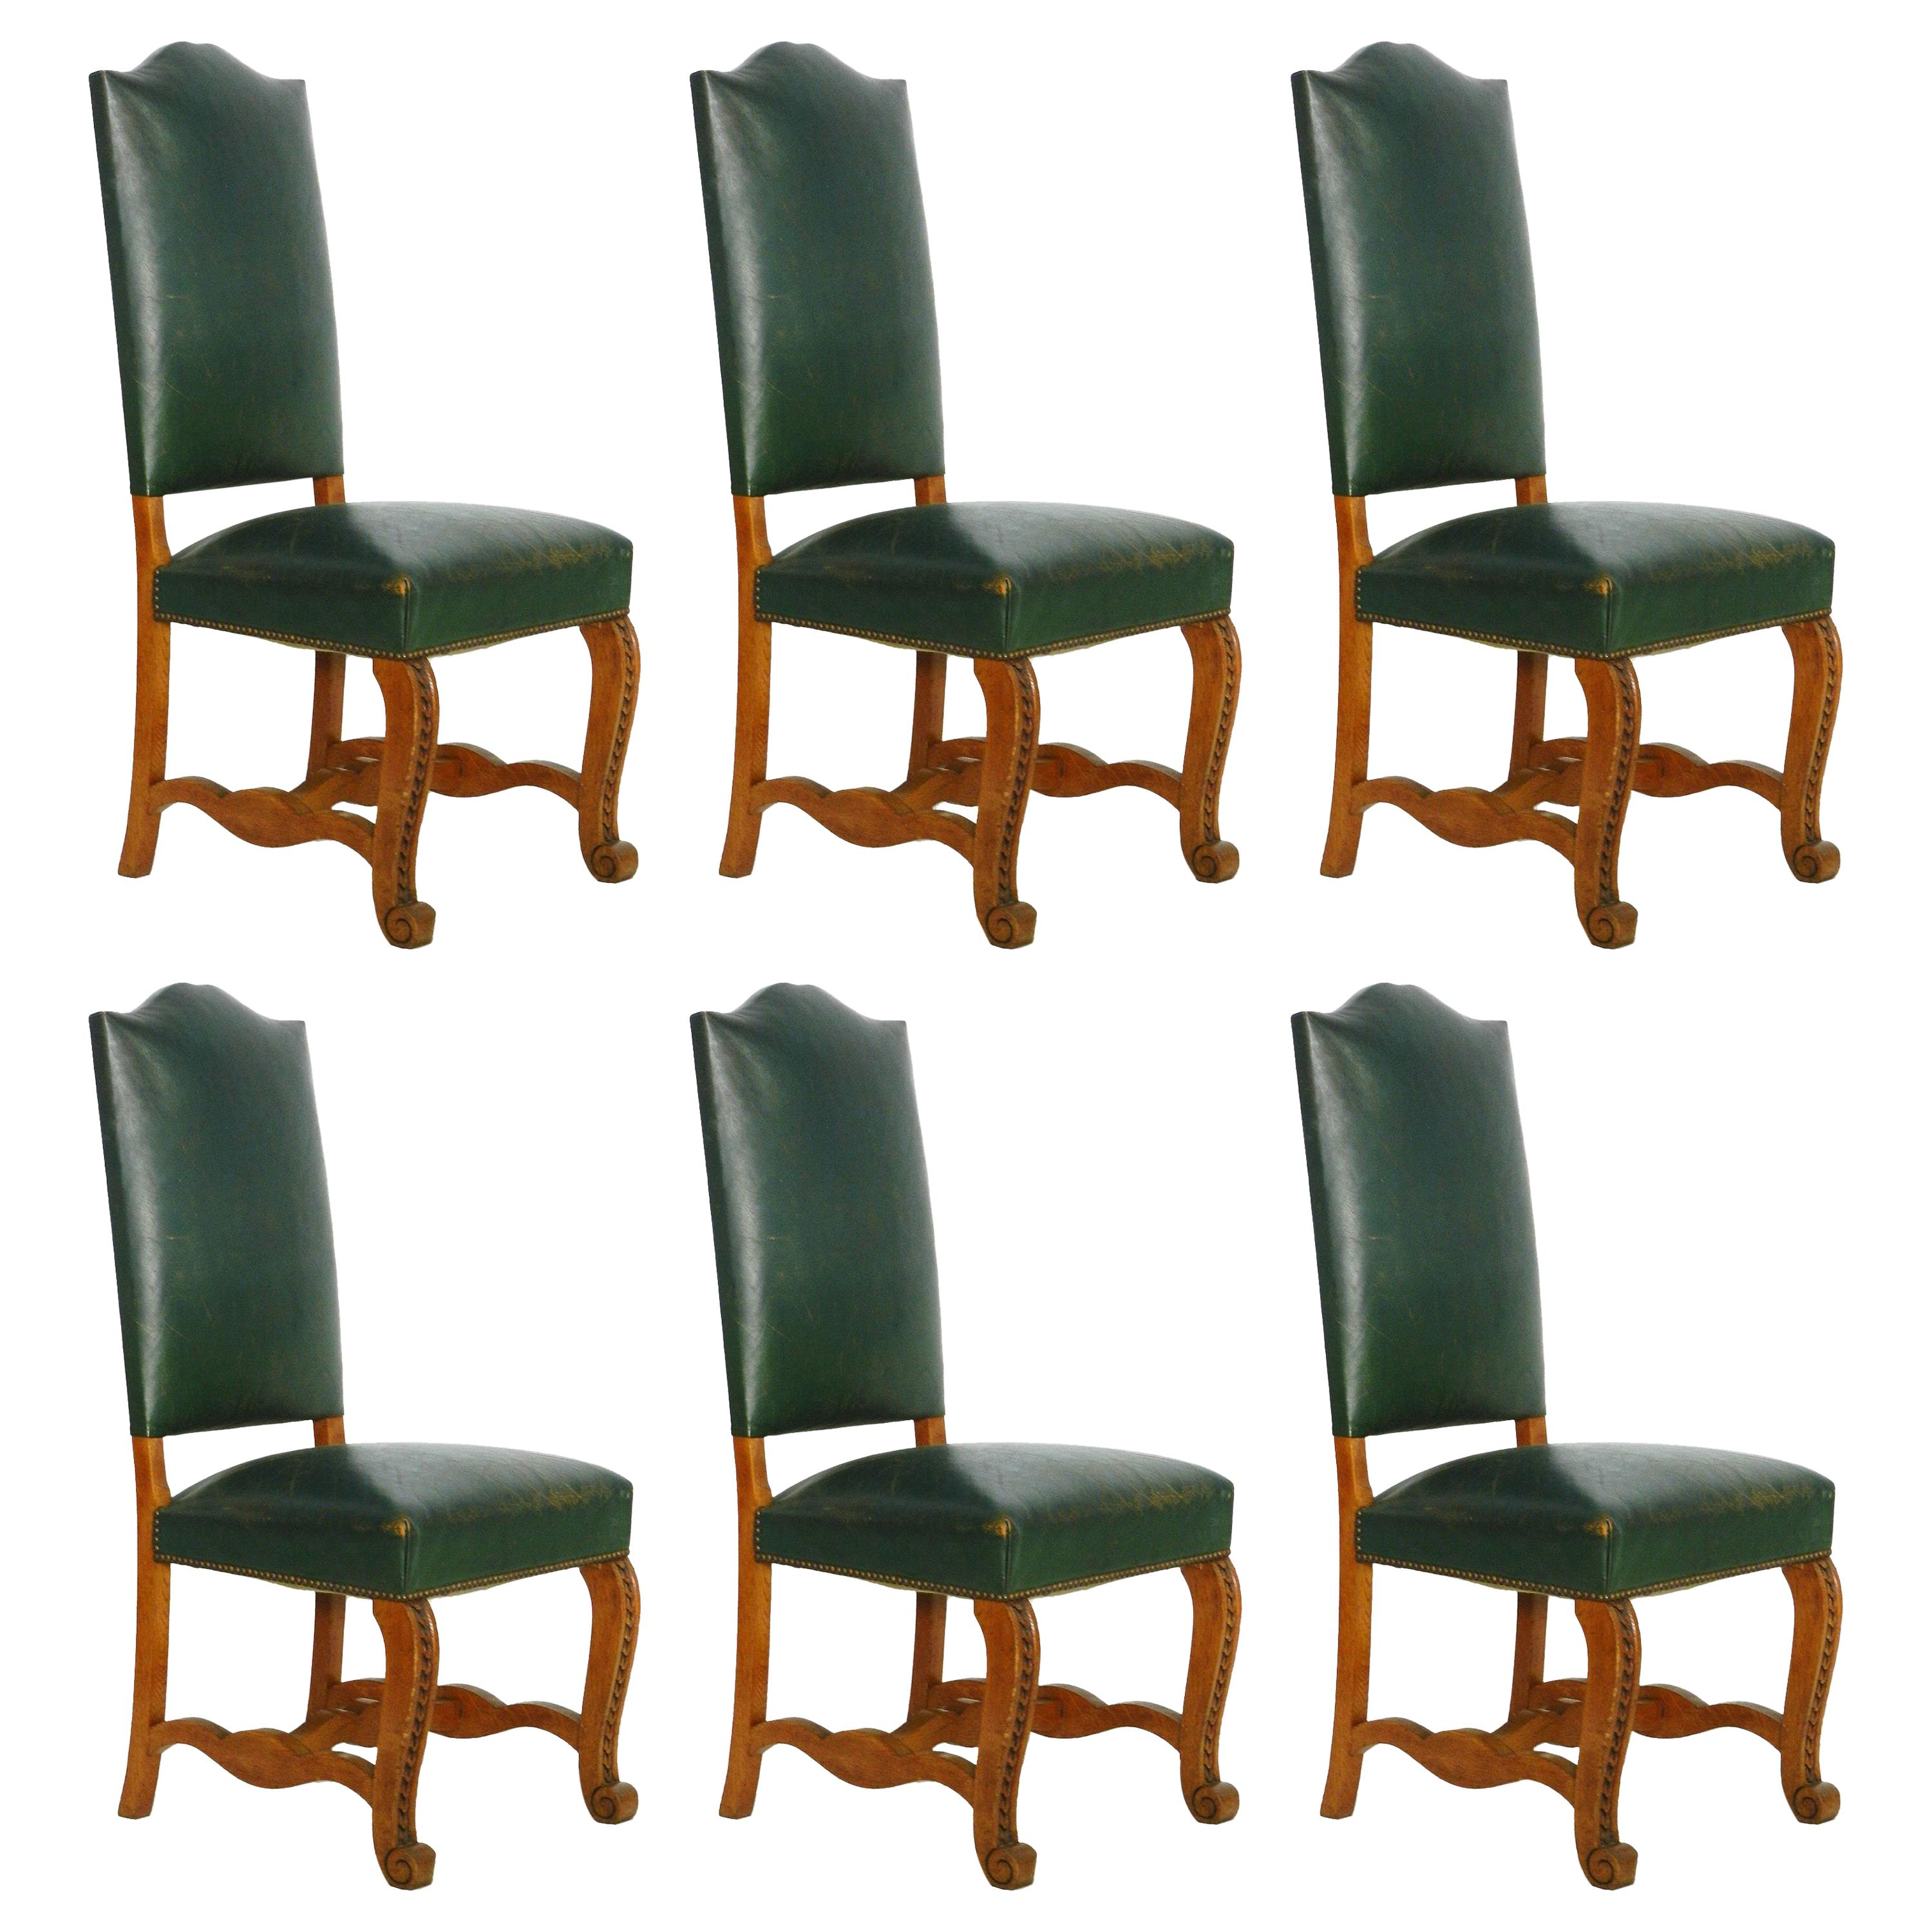 Six Dining Chairs Green Leather Upholstered, French, circa 1920